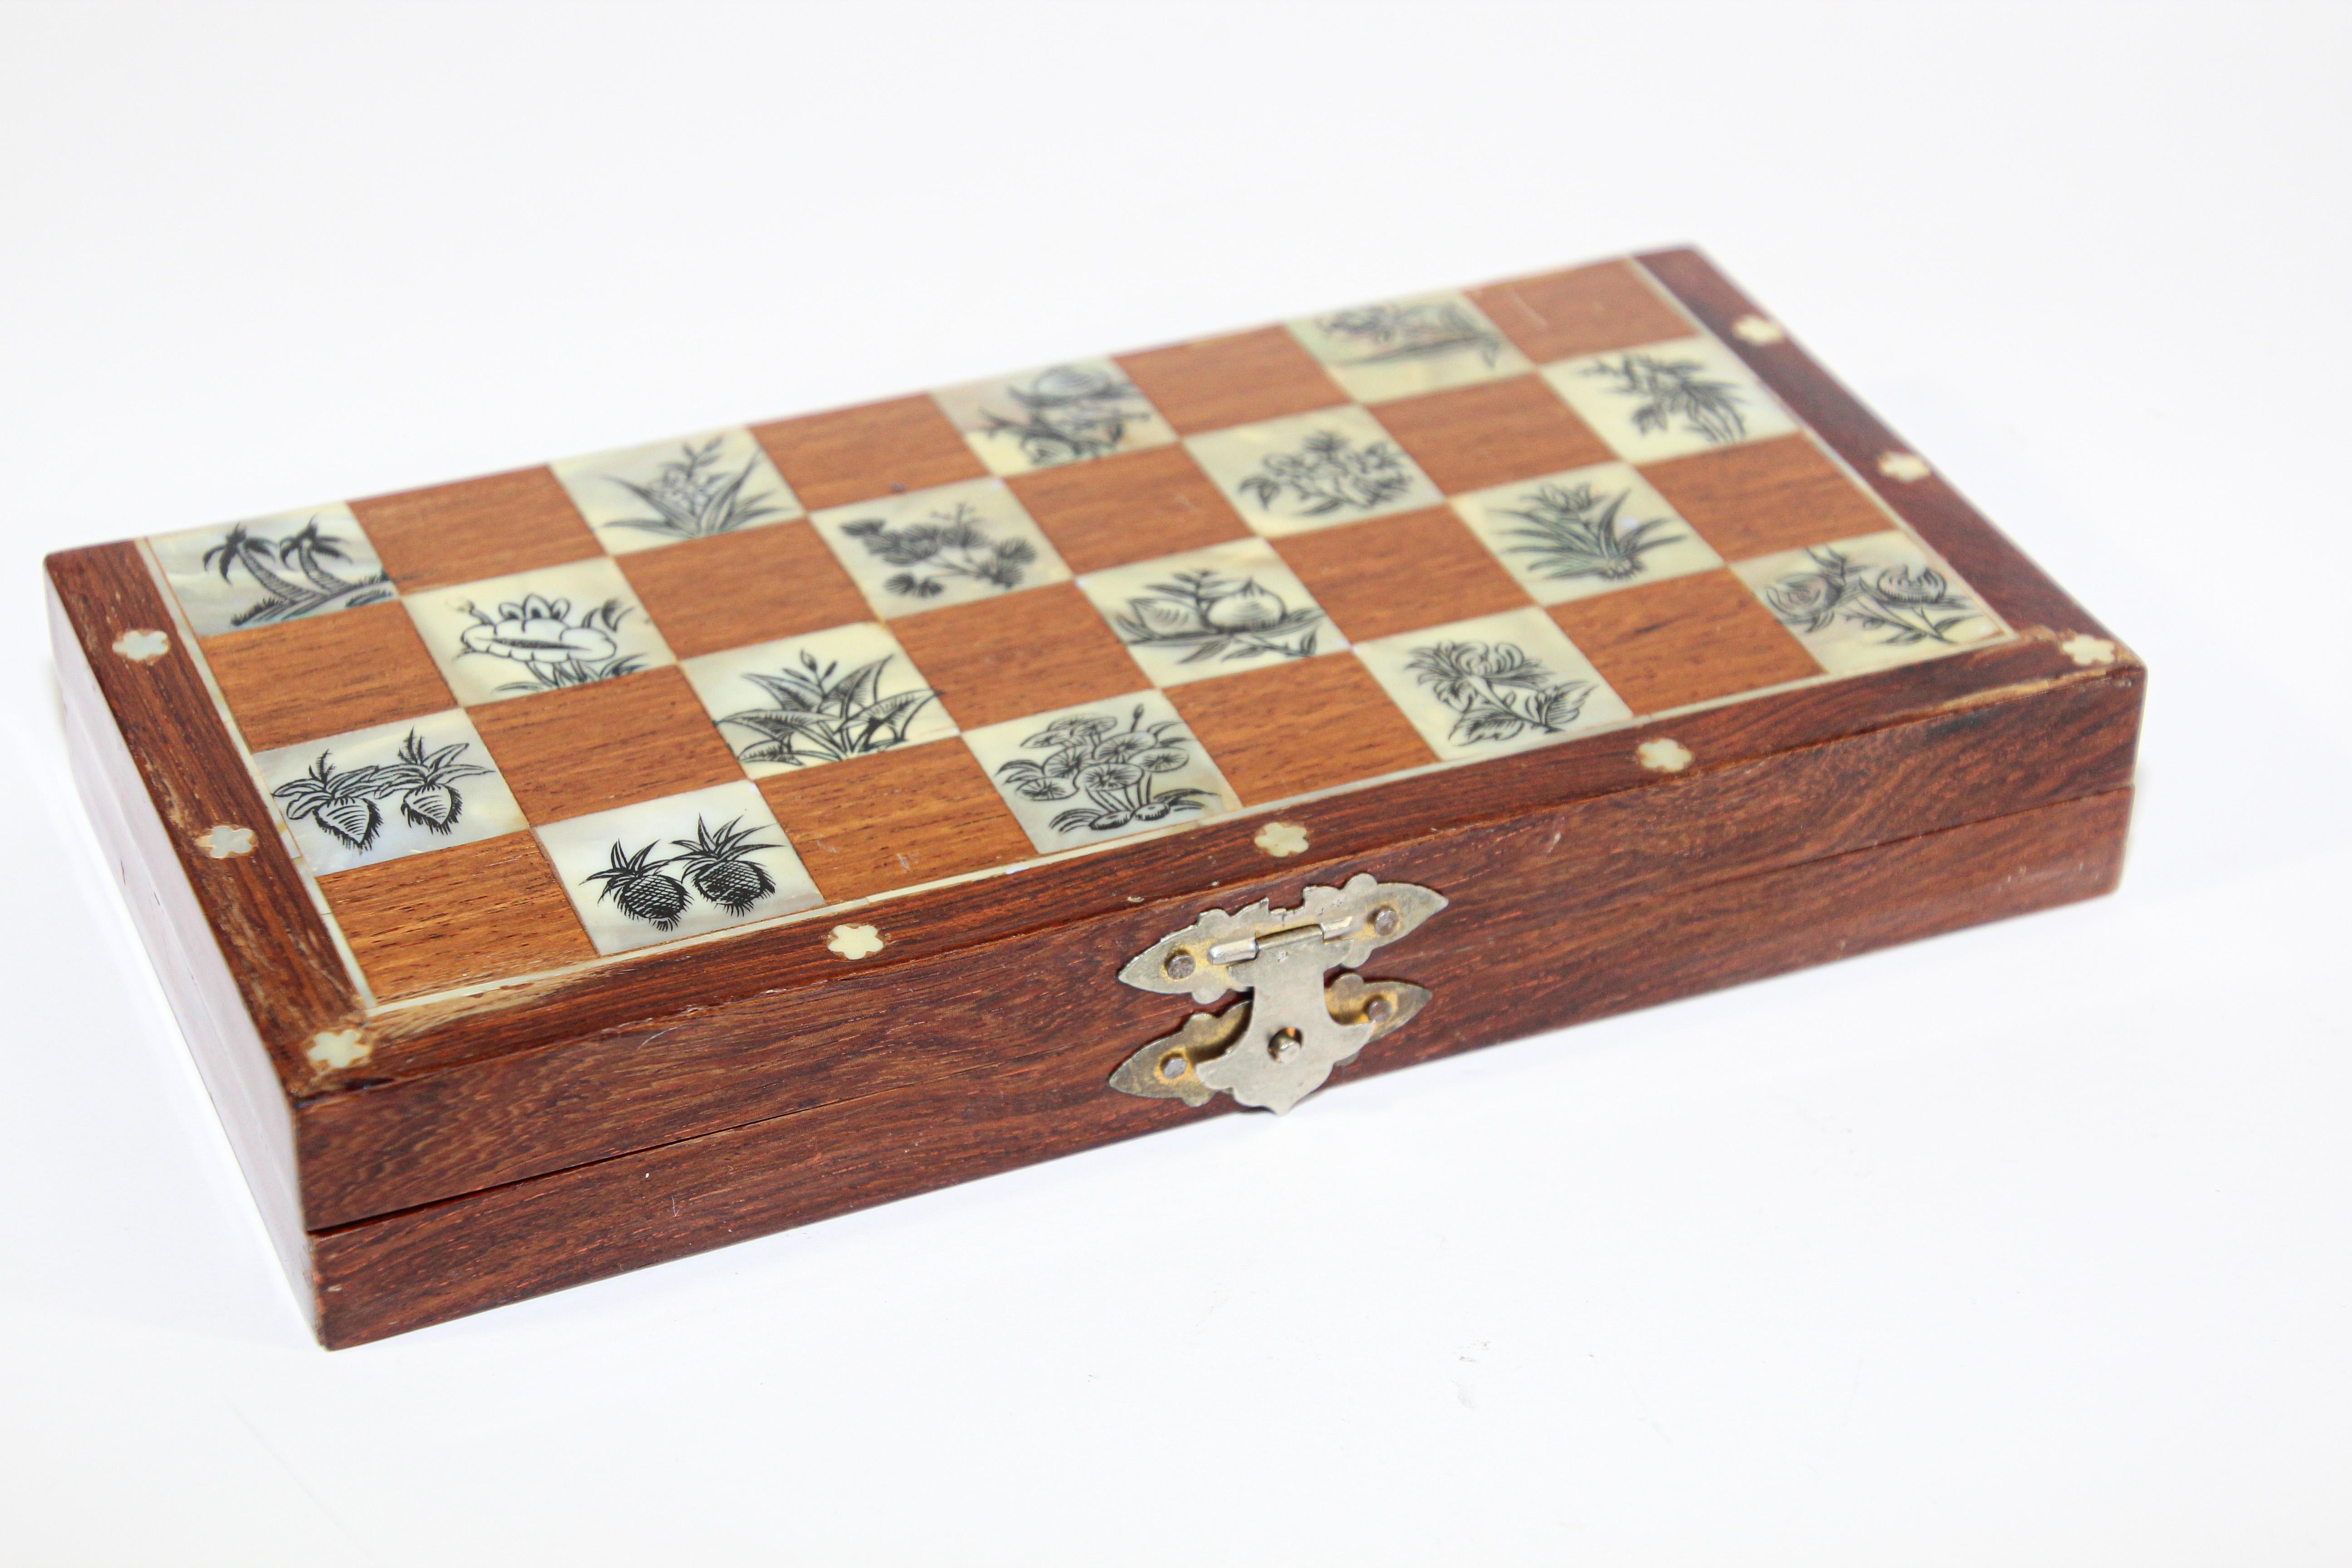 Middle Eastern Moorish Inlaid Chess Board Box In Good Condition For Sale In North Hollywood, CA